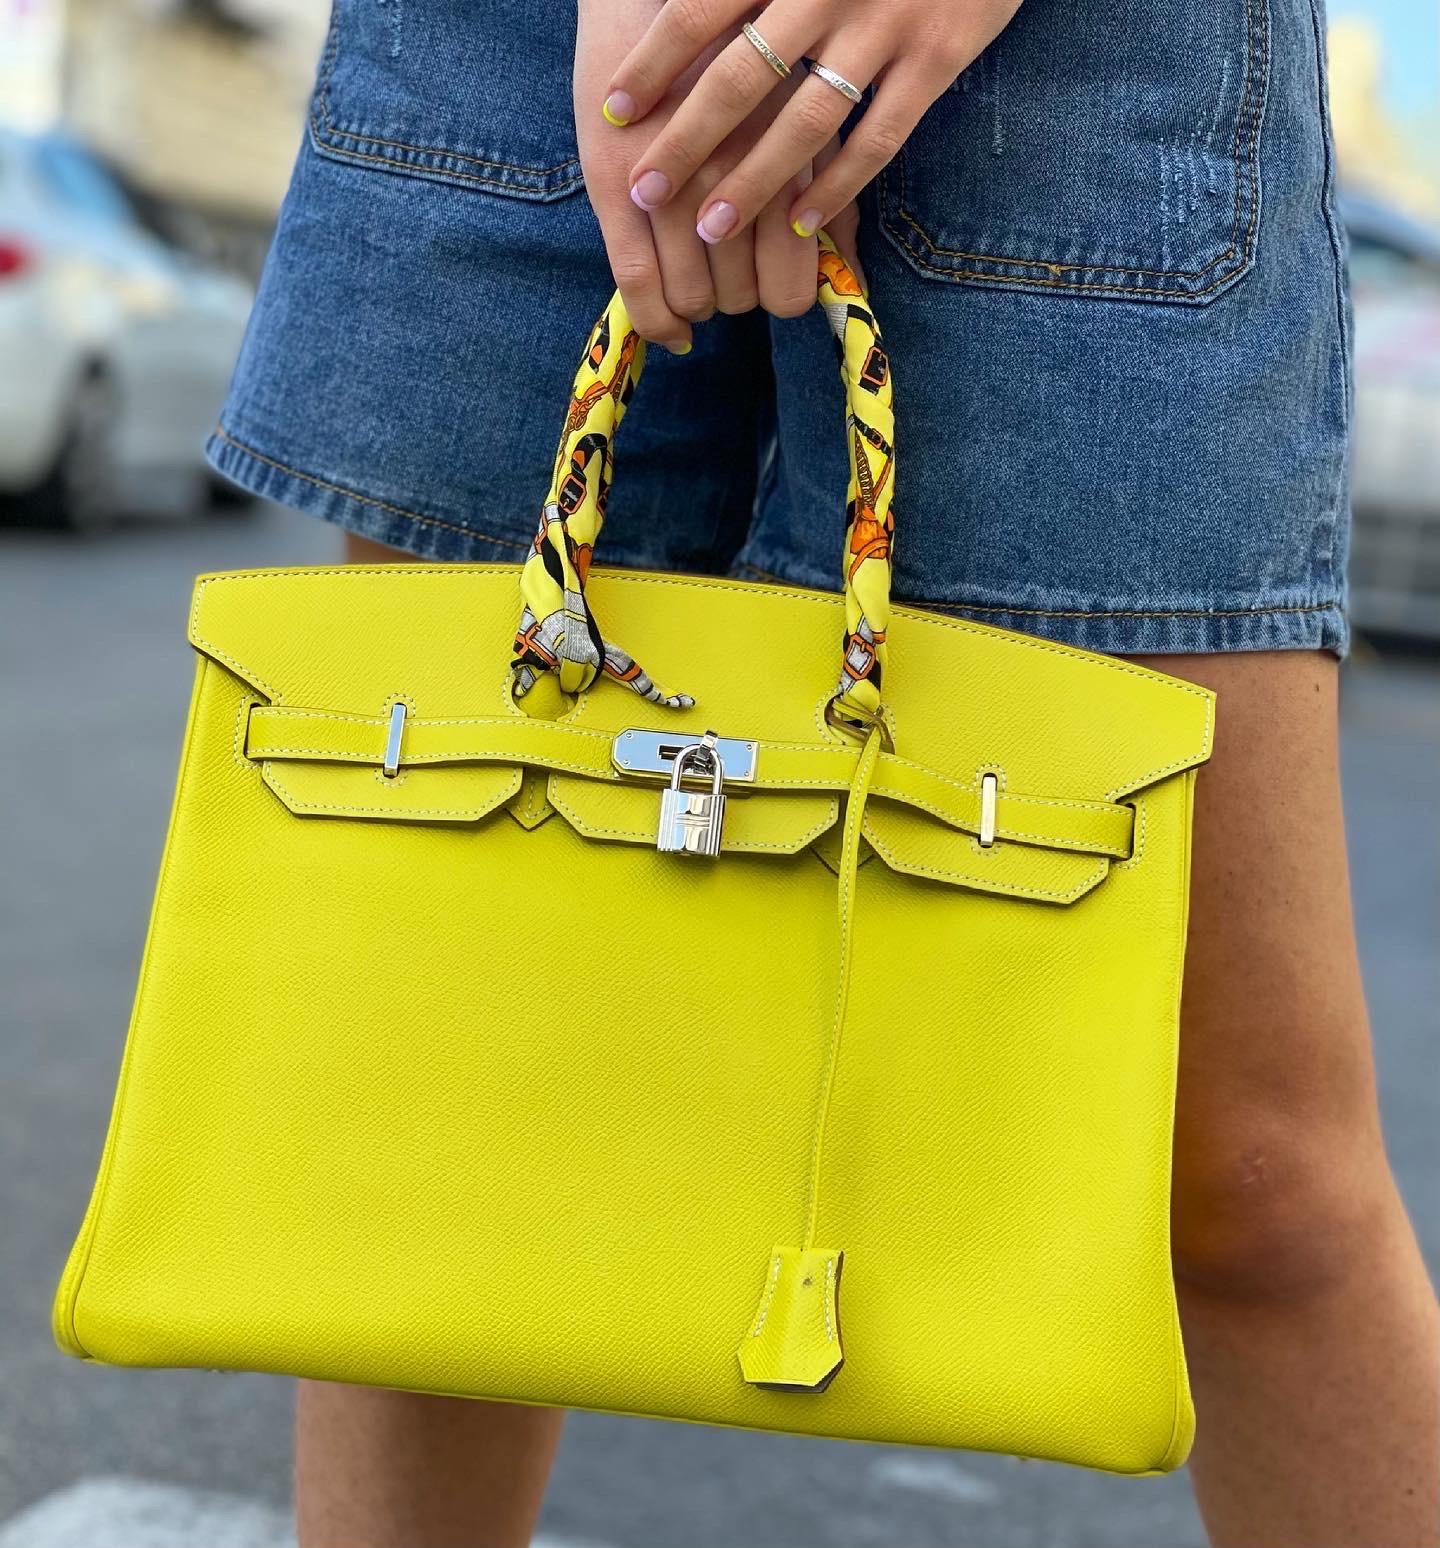 Hermès Stratospheric Birkin crafted in Lemon-colored Epsom and silver hardware.

Equipped with a closure with straps, padlock and keys. Equipped with double leather handle enriched by a beautiful scarf.

Very large inside, covered in gray leather